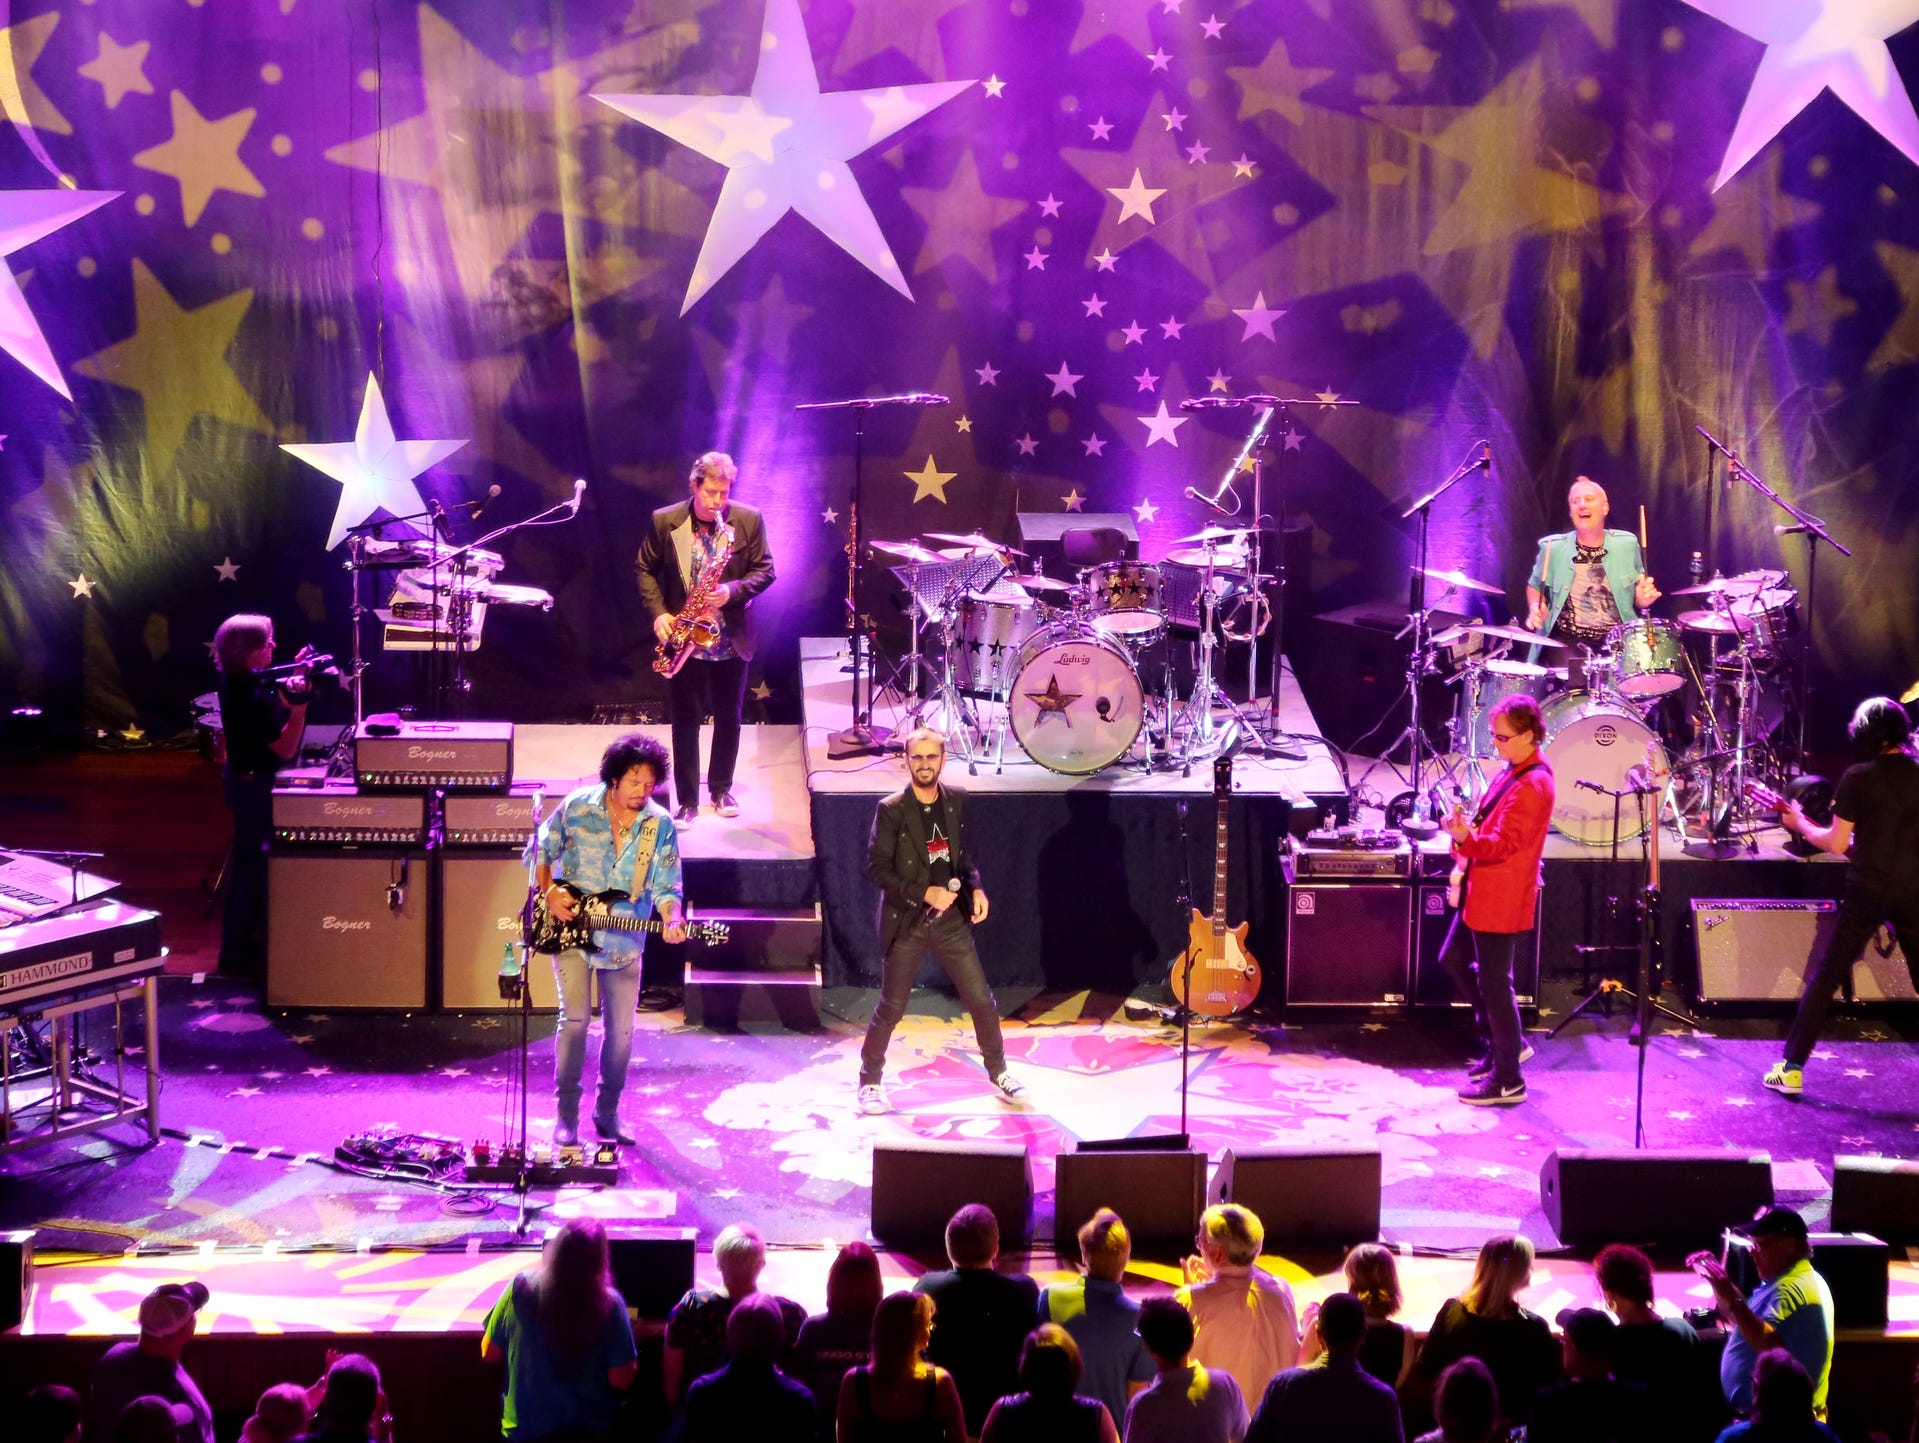 Ringo Starr & His All-Starr Band perform at the Ryman